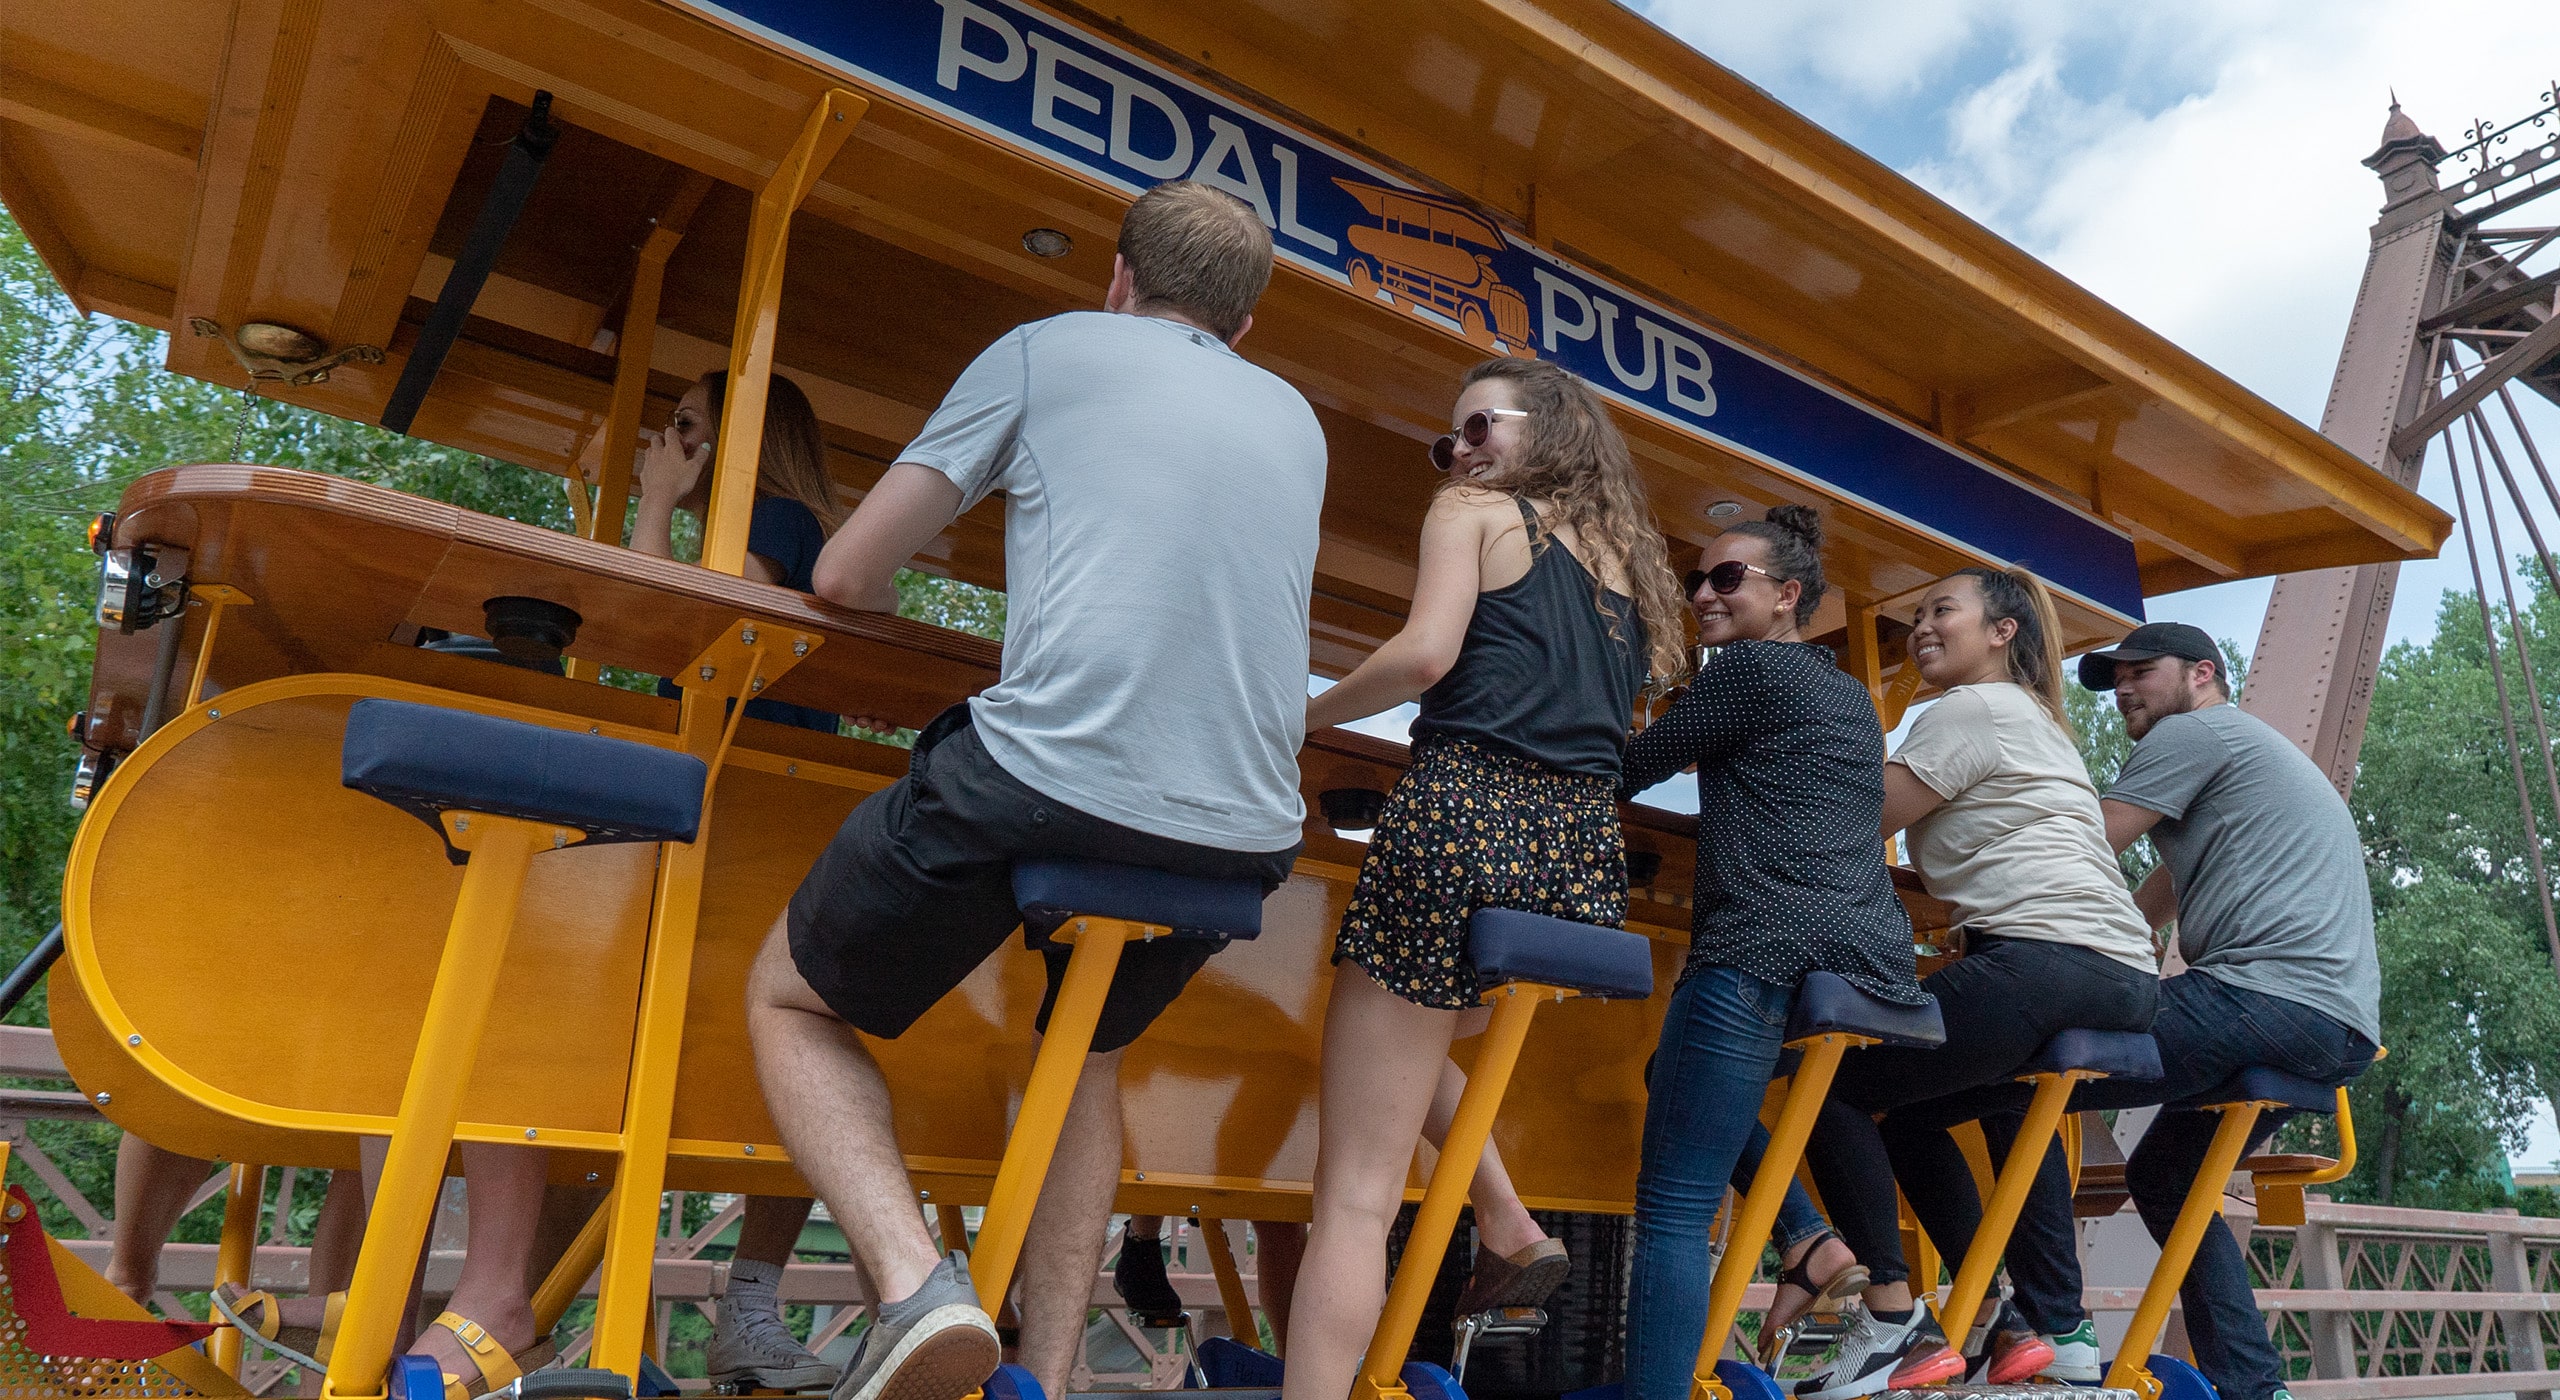 Pedal Pub Party Bike to Offer Tours of Downtown, Springfield, and Riverside Bars